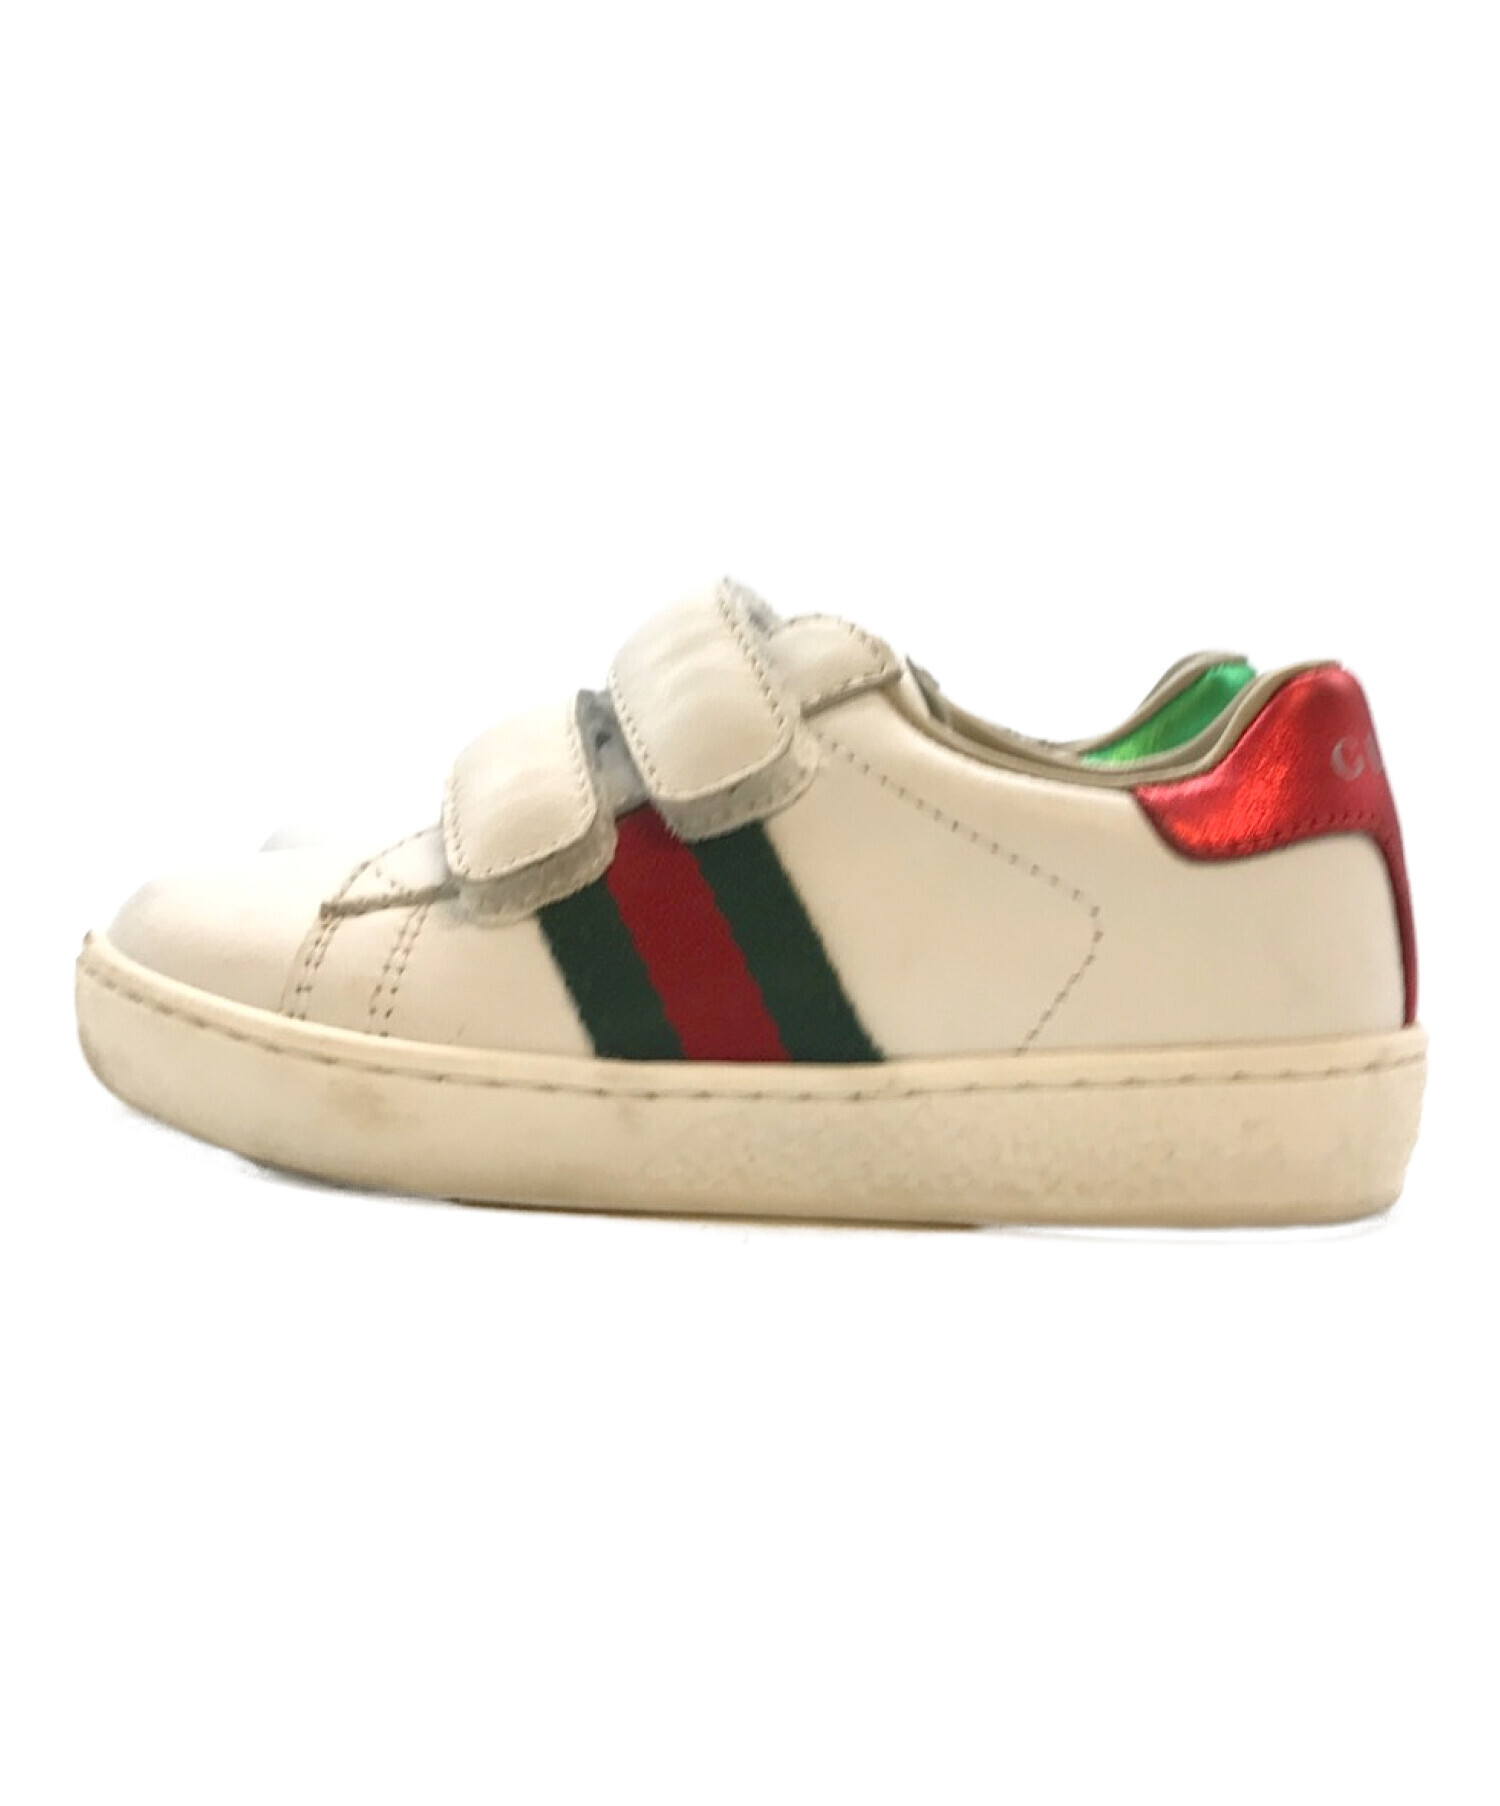 GUCCI シューズ（その他） キッズ グッチ 中古 古着 - キッズ